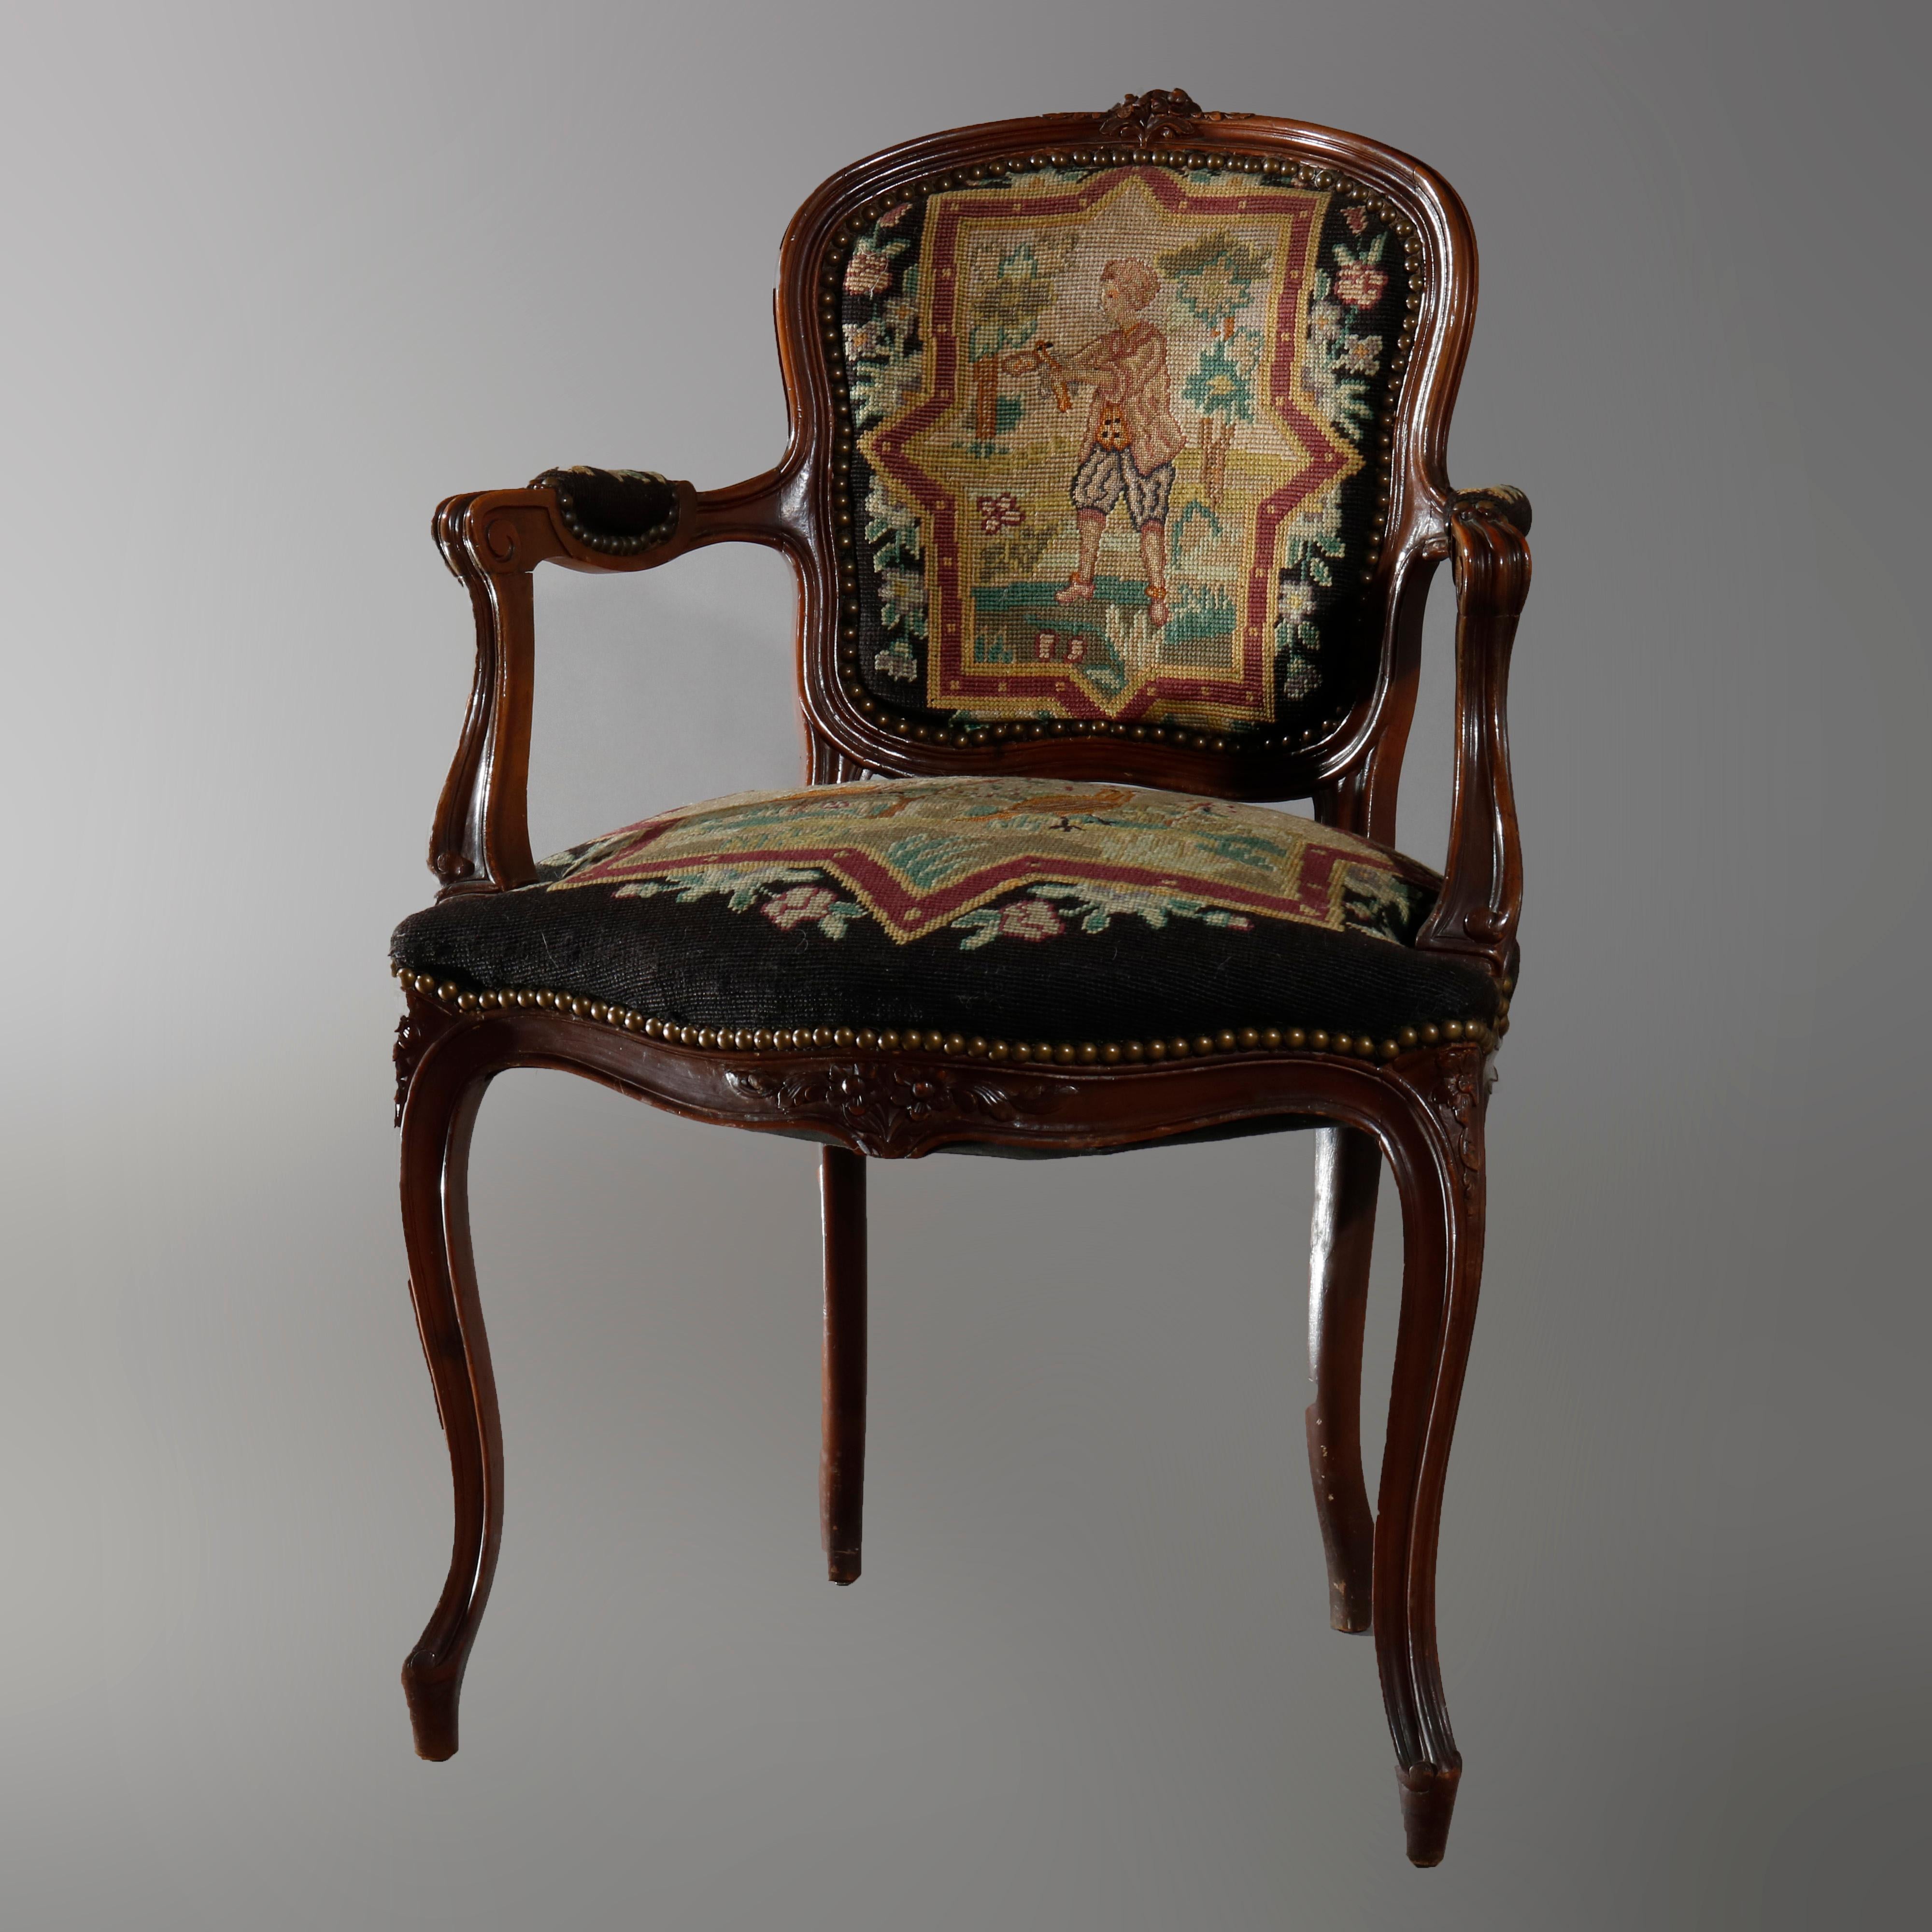 20th Century Antique French Louis XIV Needlepoint Fauteuil Armchair, circa 1920